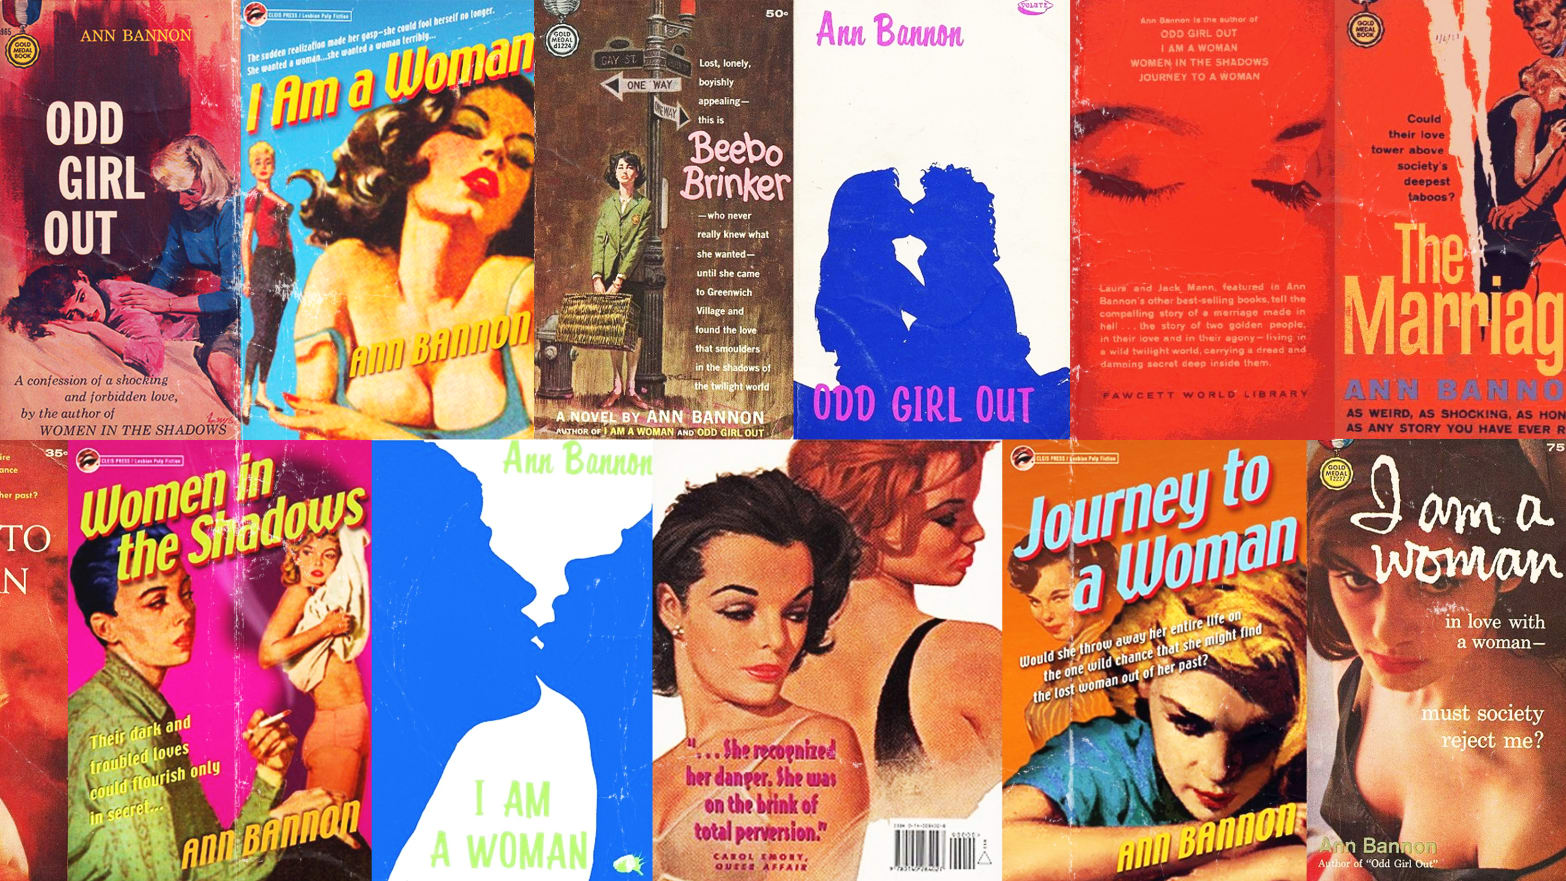 Ann Bannon, the Queen of Lesbian Pulp Fiction, Reveals Her Own